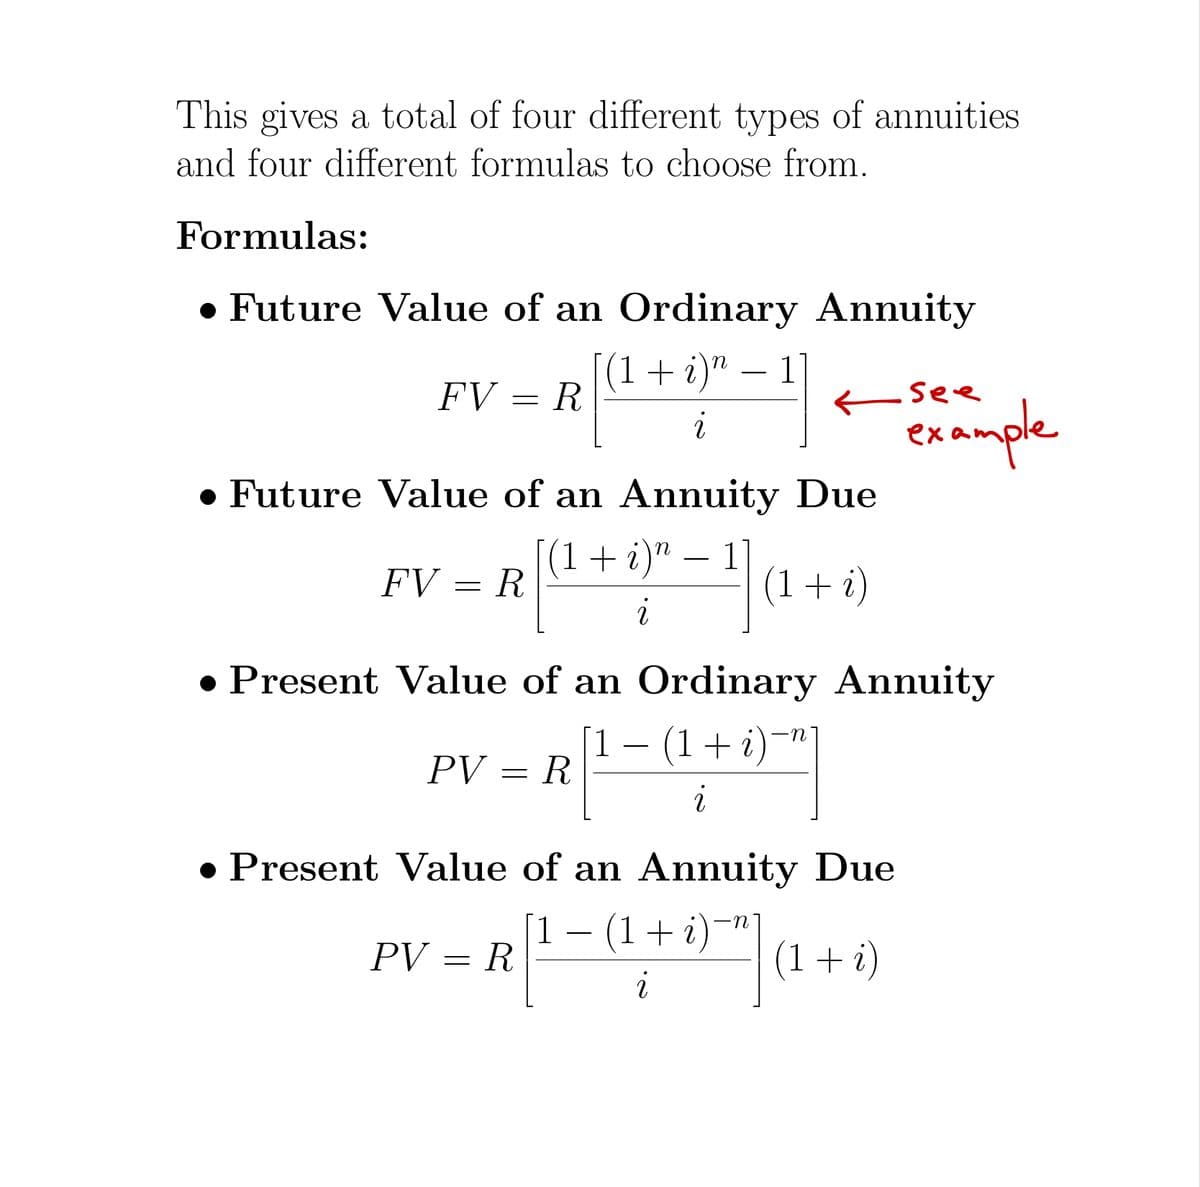 This gives a total of four different types of annuities
and four different formulas to choose from.
Formulas:
• Future Value of an Ordinary Annuity
[(1 + і)" — 1
R
FV
- See
example
i
• Future Value of an Annuity Due
(1+ i)" – 1
(1+ i)
-
FV = R
i
• Present Value of an Ordinary Annuity
1.
– (1+i)¬"]
R
-
PV
• Present Value of an Annuity Due
[1 – (1+ i)~"]
PV = R
(1+i)
